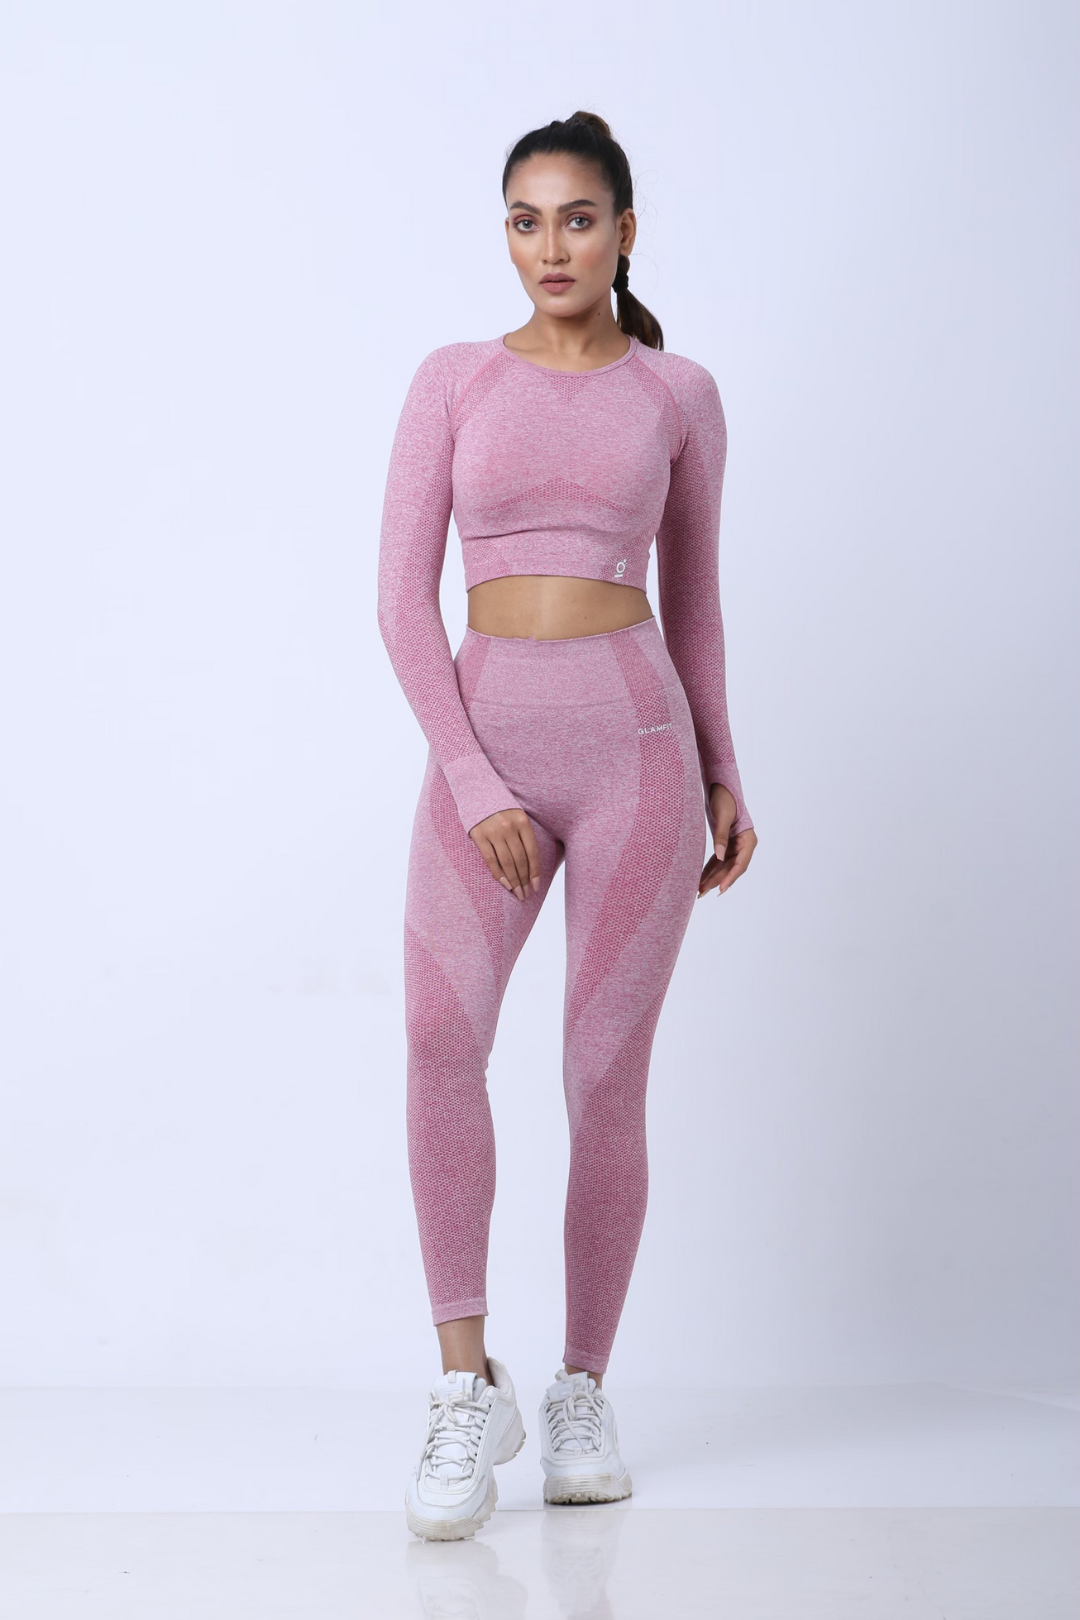 Women Seamless Workout Outfits Sport Long Sleeve And Legging Pink Plain